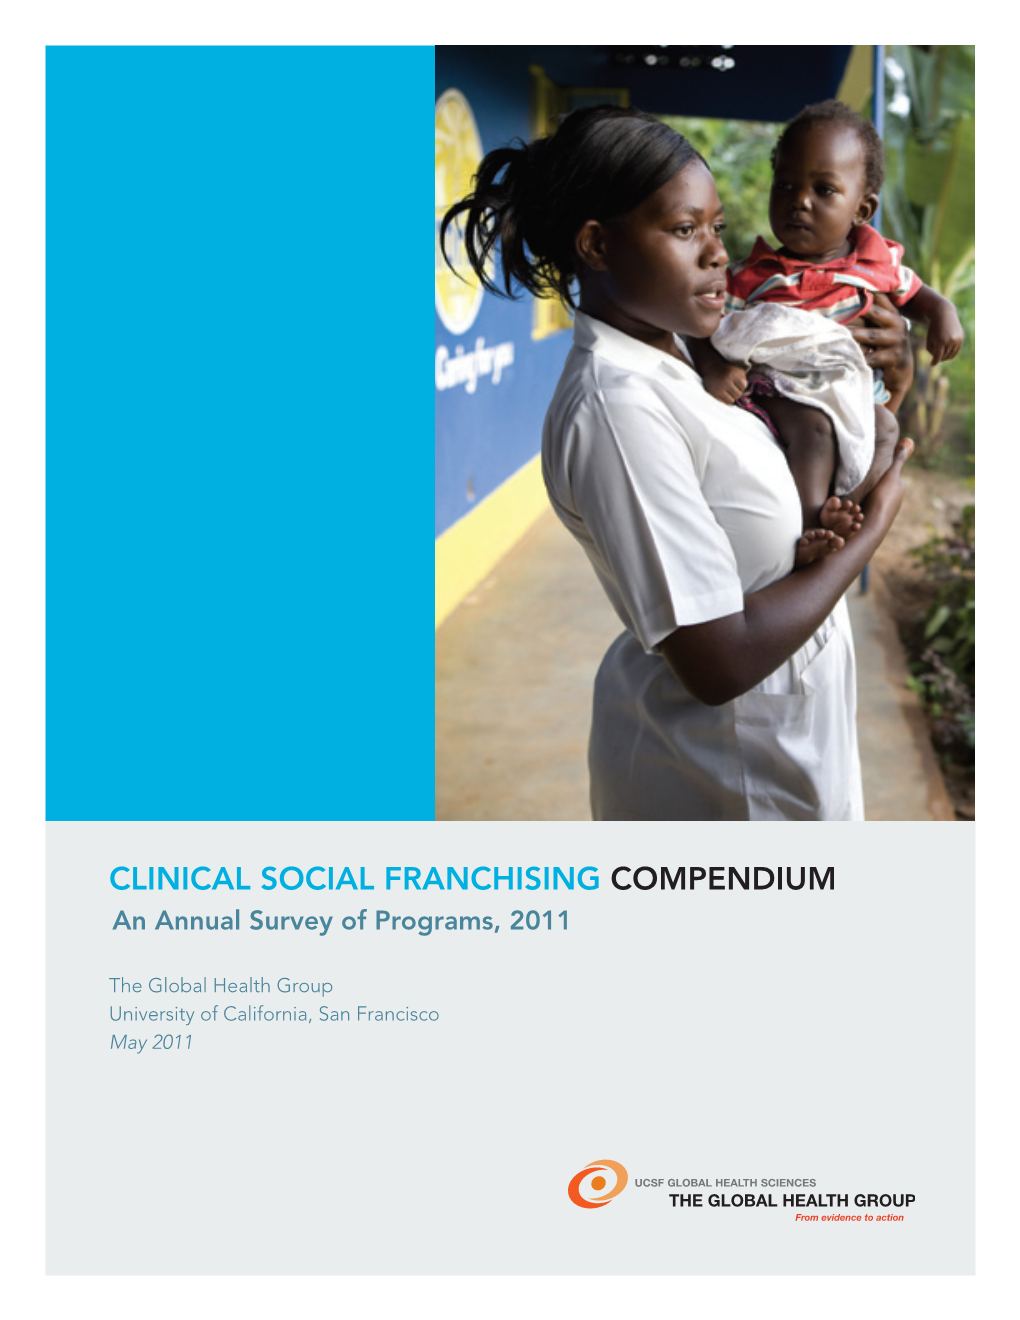 Clinical Social Franchising Compendium an Annual Survey of Programs, 2011